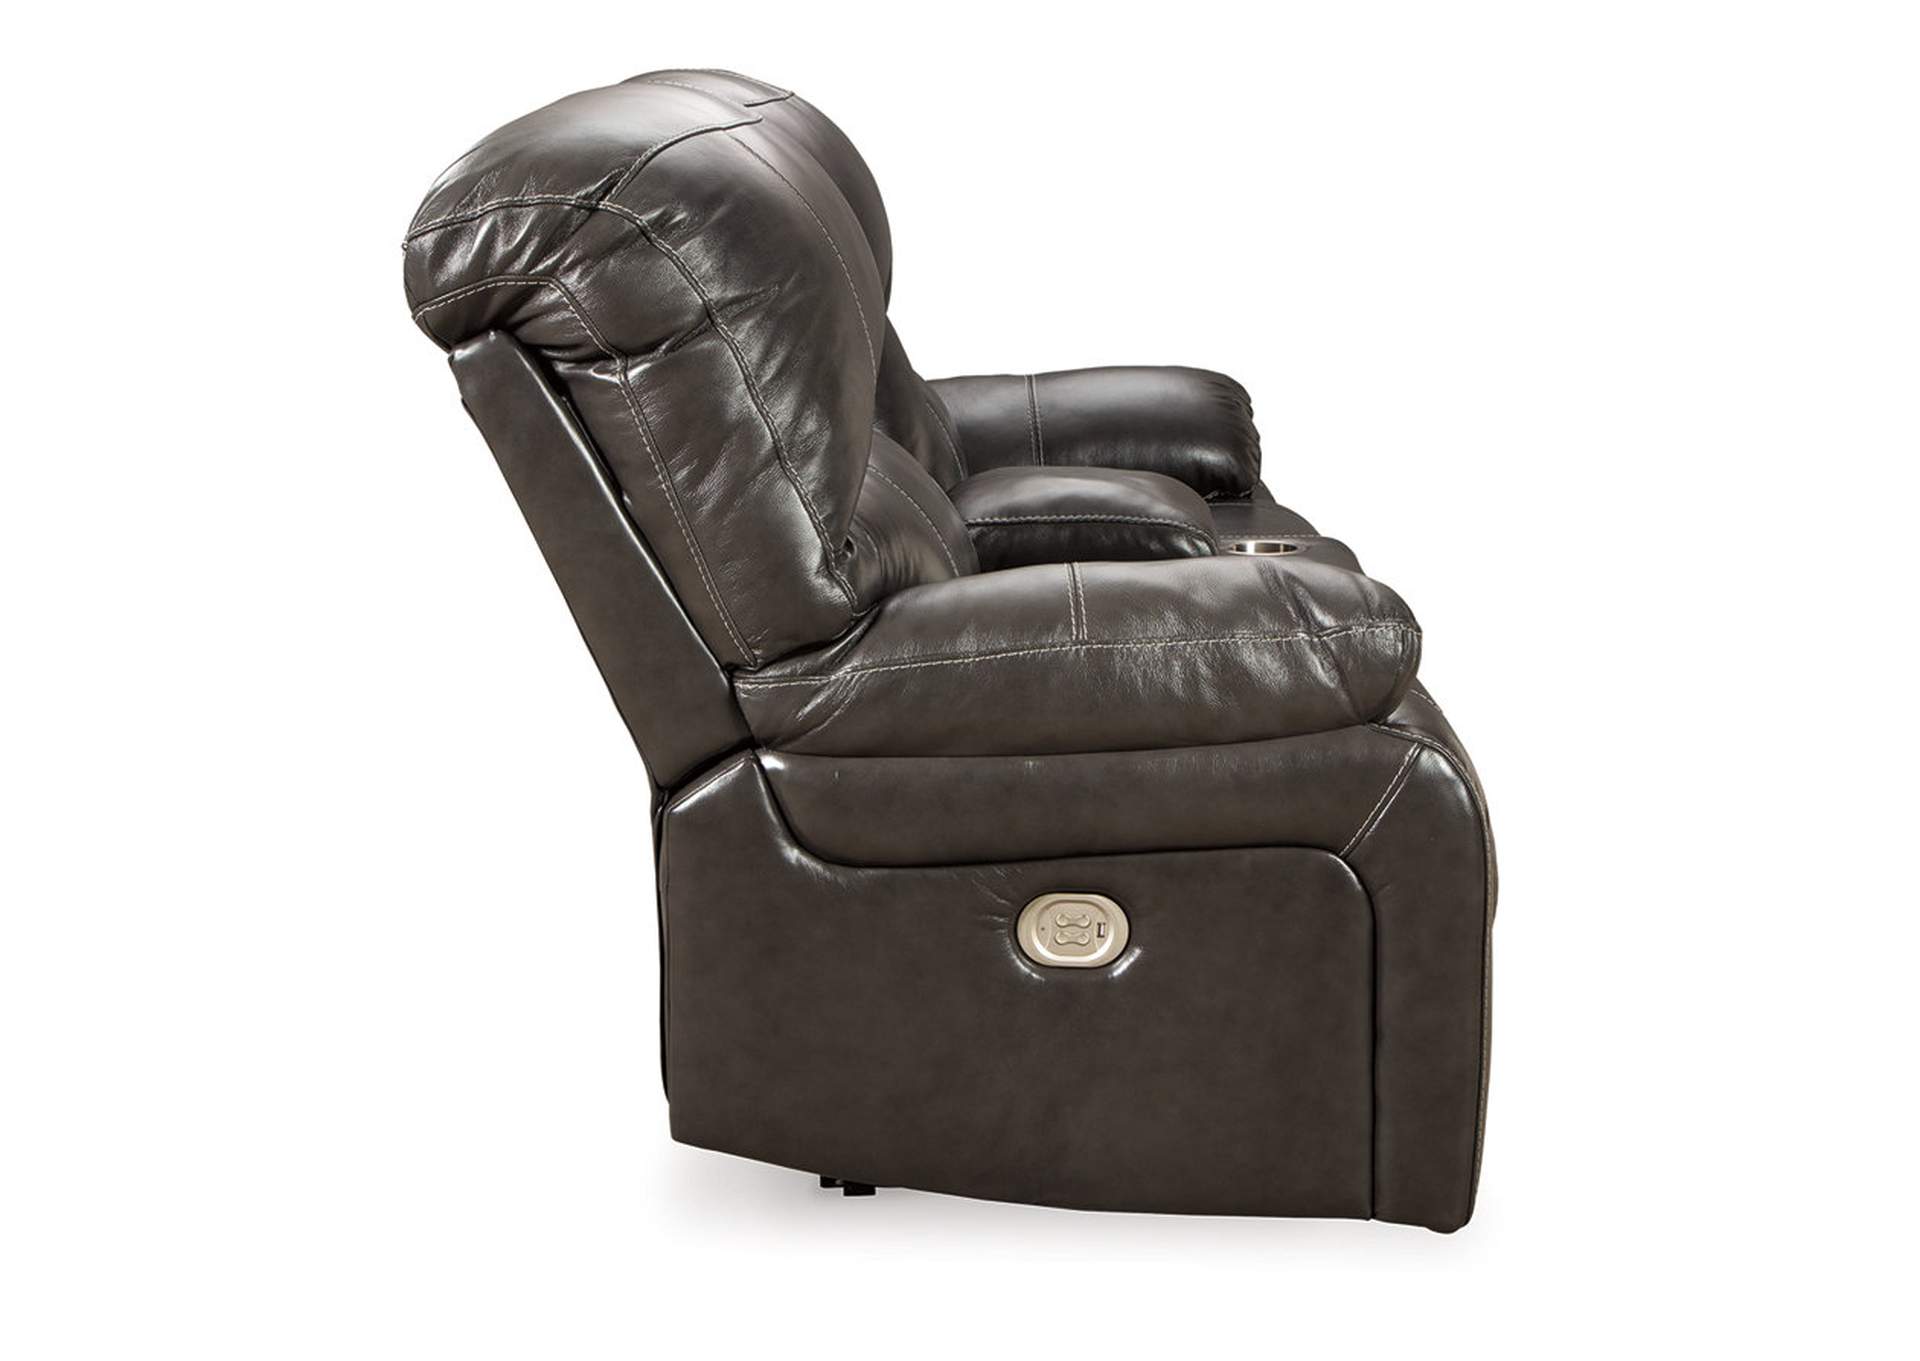 Hallstrung Power Reclining Loveseat with Console,Signature Design By Ashley